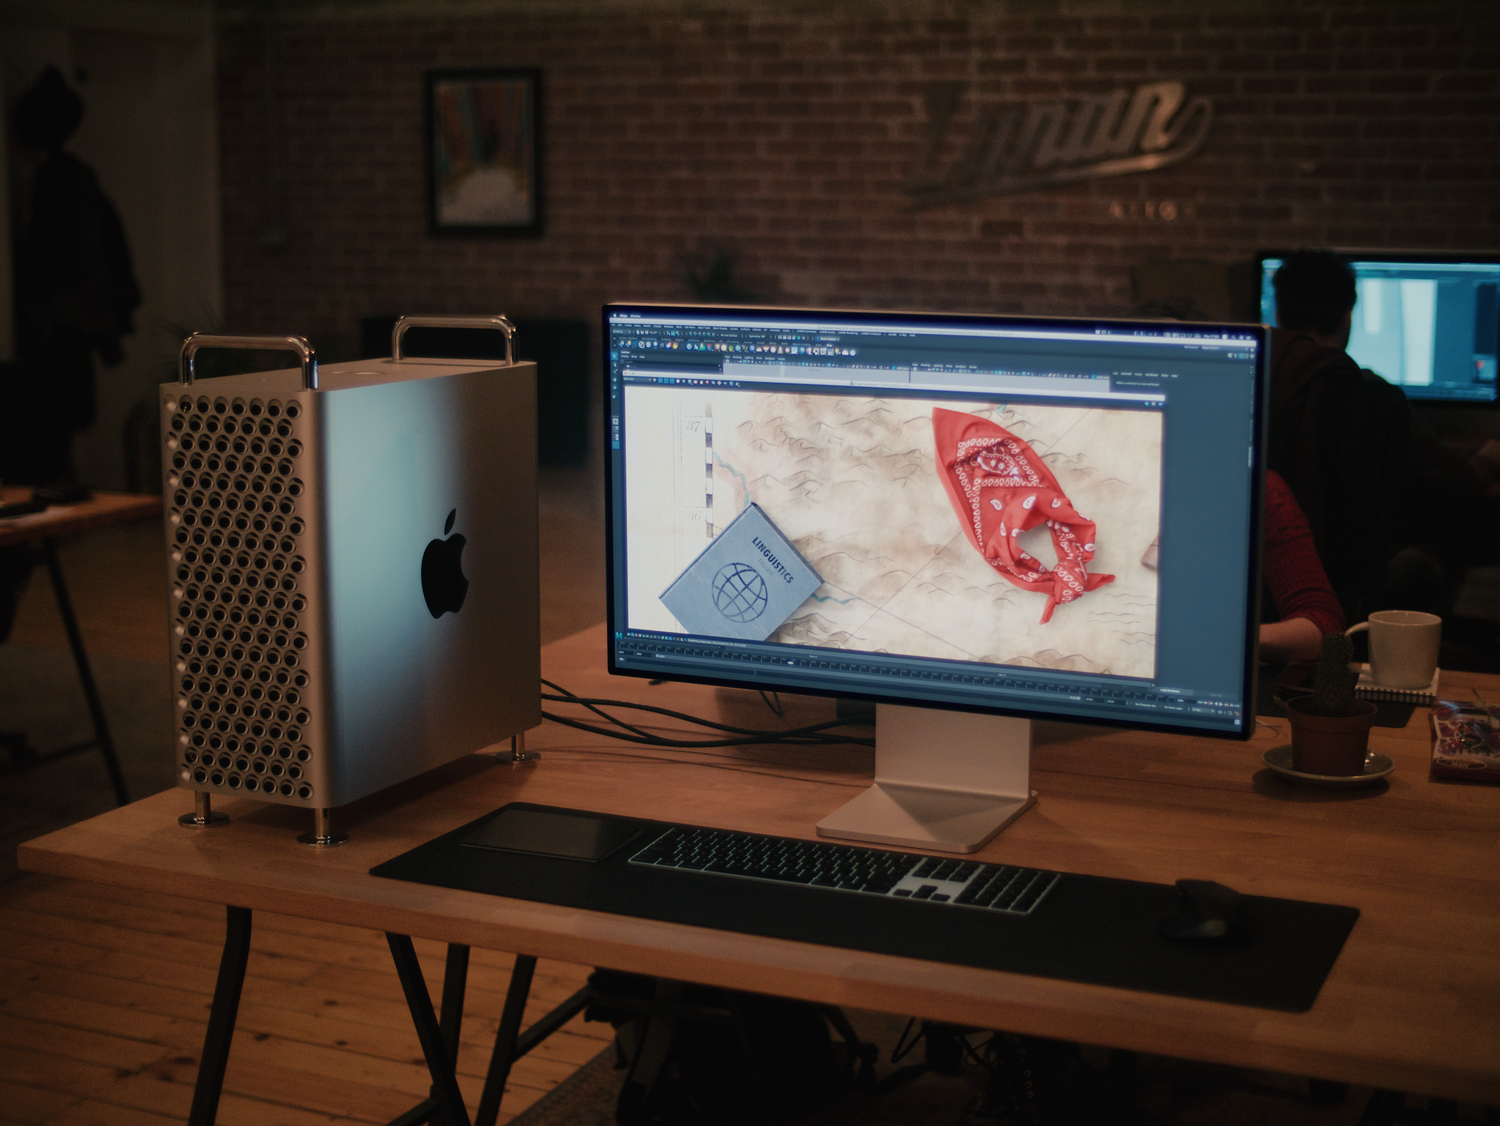 Using the new Mac Pro and Pro Display XDR on Jumanji: The Next Level